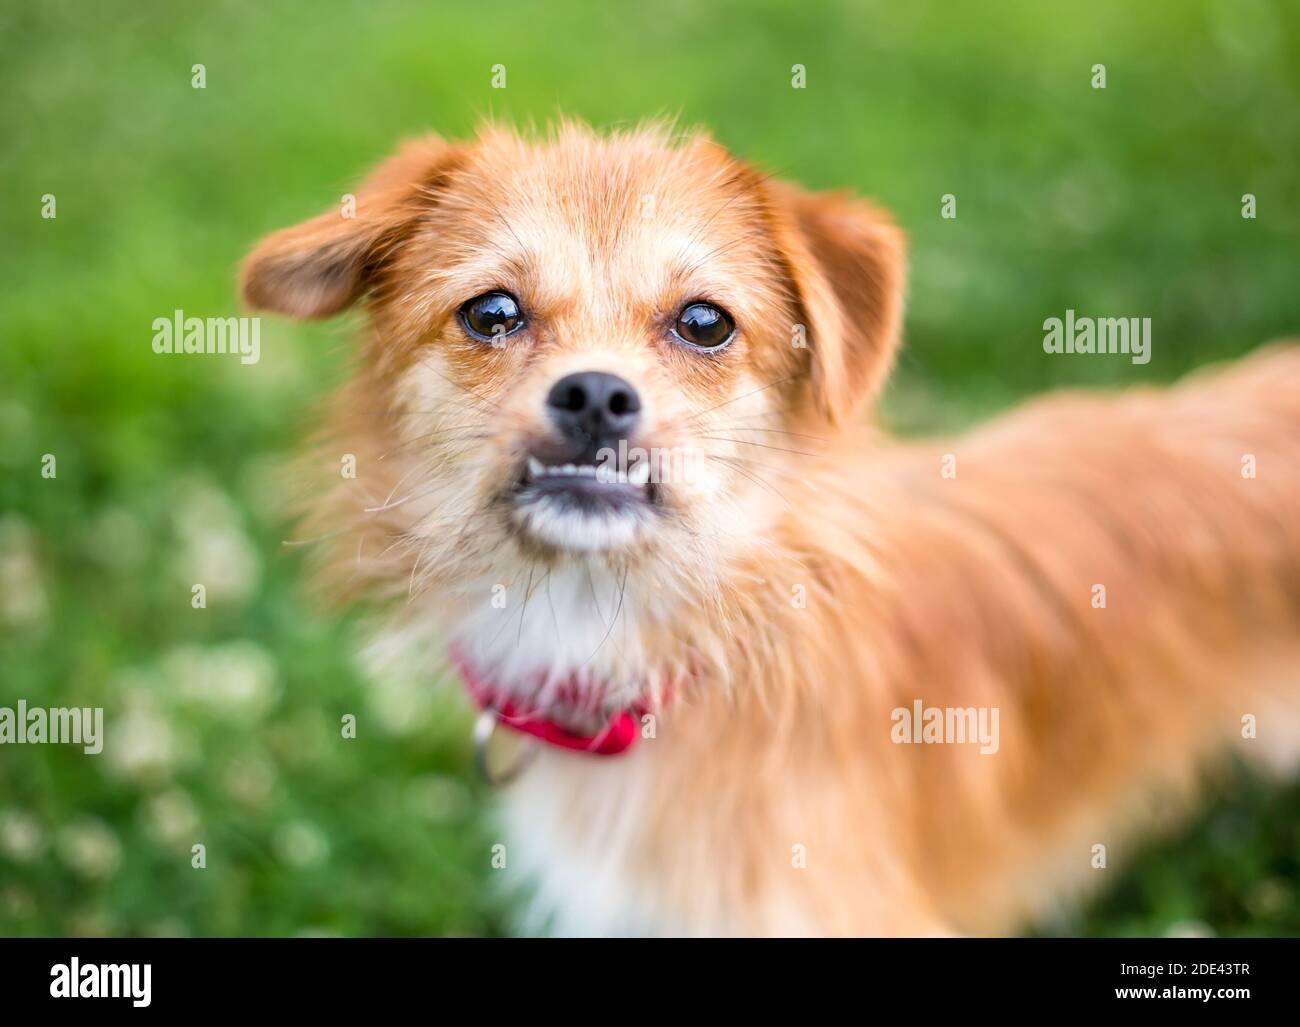 A scruffy mixed breed dog with an underbite and floppy ears Stock Photo